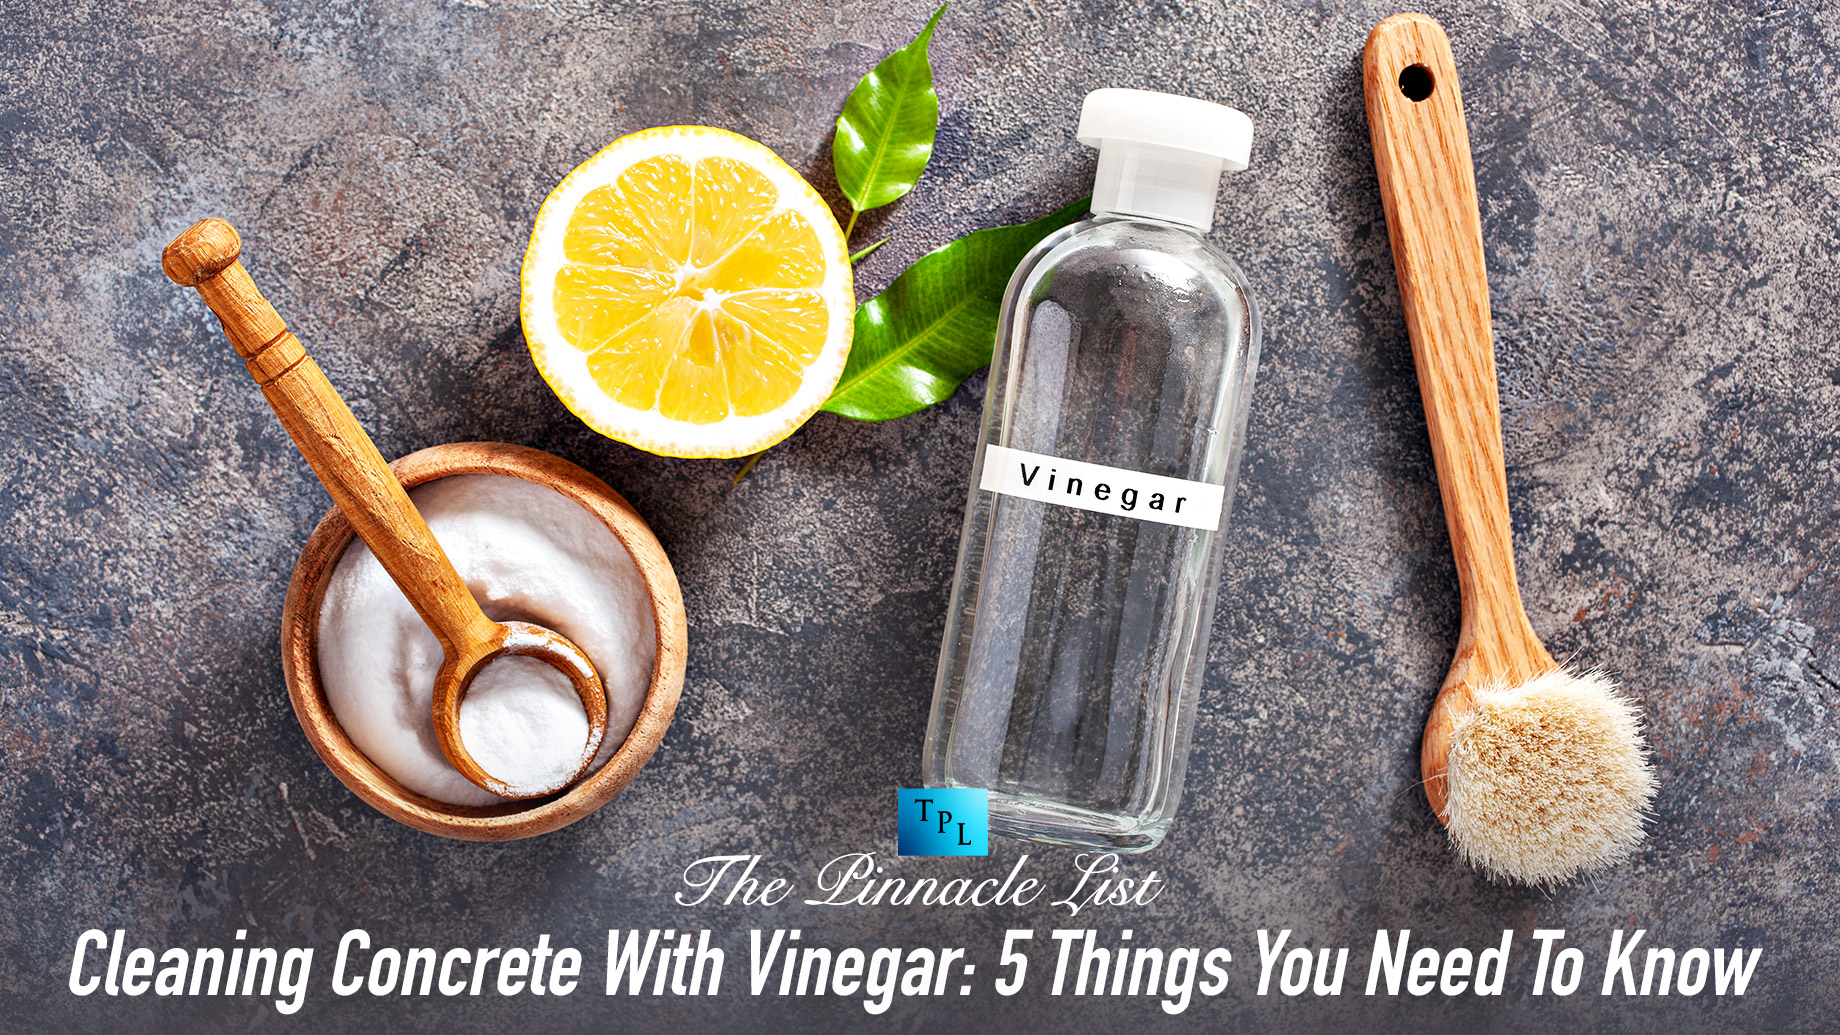 Cleaning Concrete With Vinegar: 5 Things You Need To Know